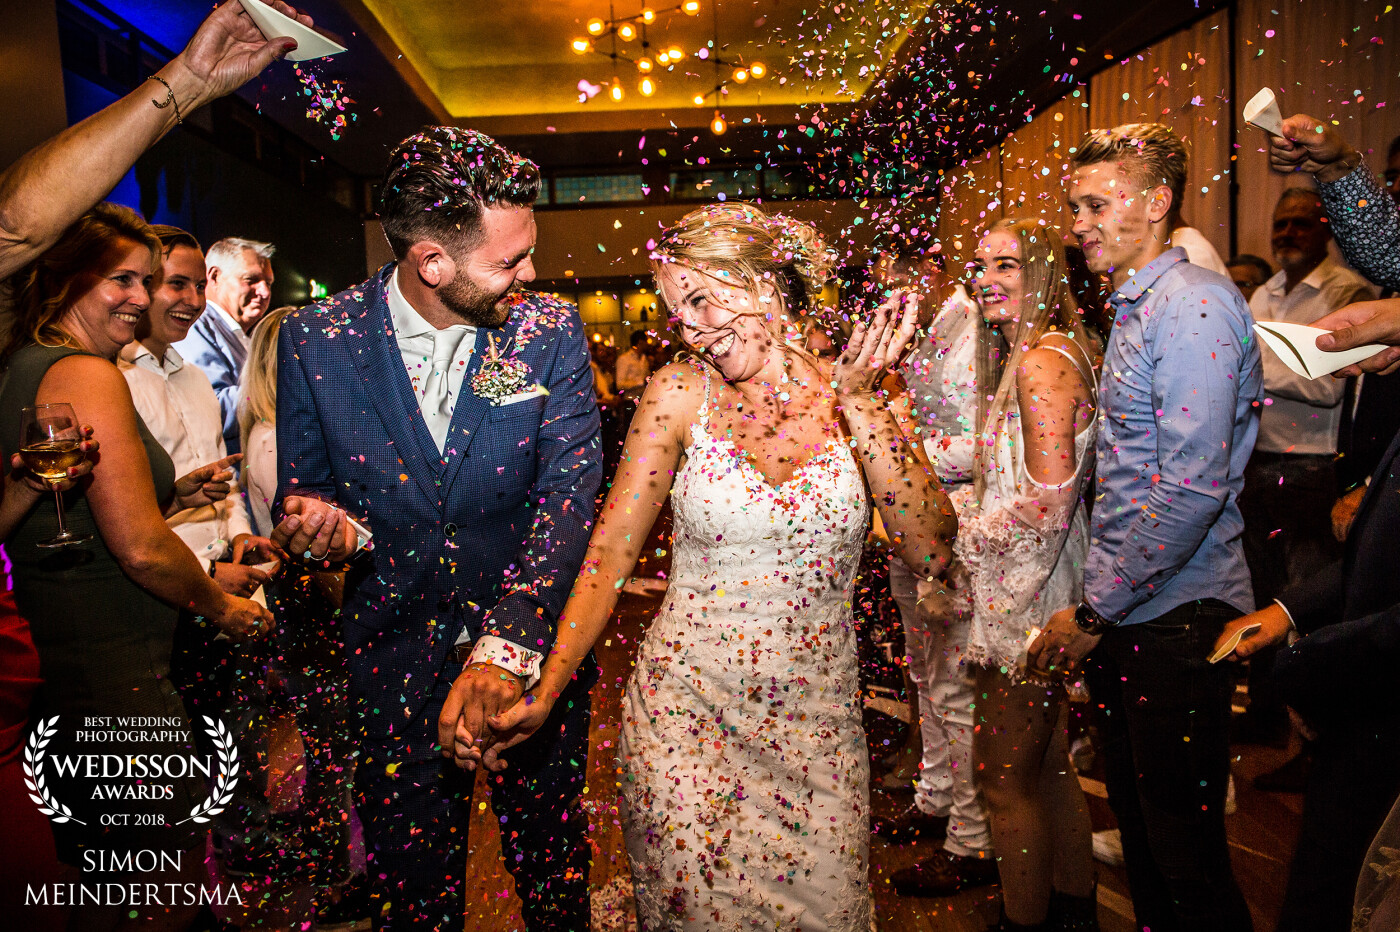 This image is a the start of a really great party with lots of young people.. Through an aisle of people with confetti i just walk backwards in front of them keep shooting lots of pictures.